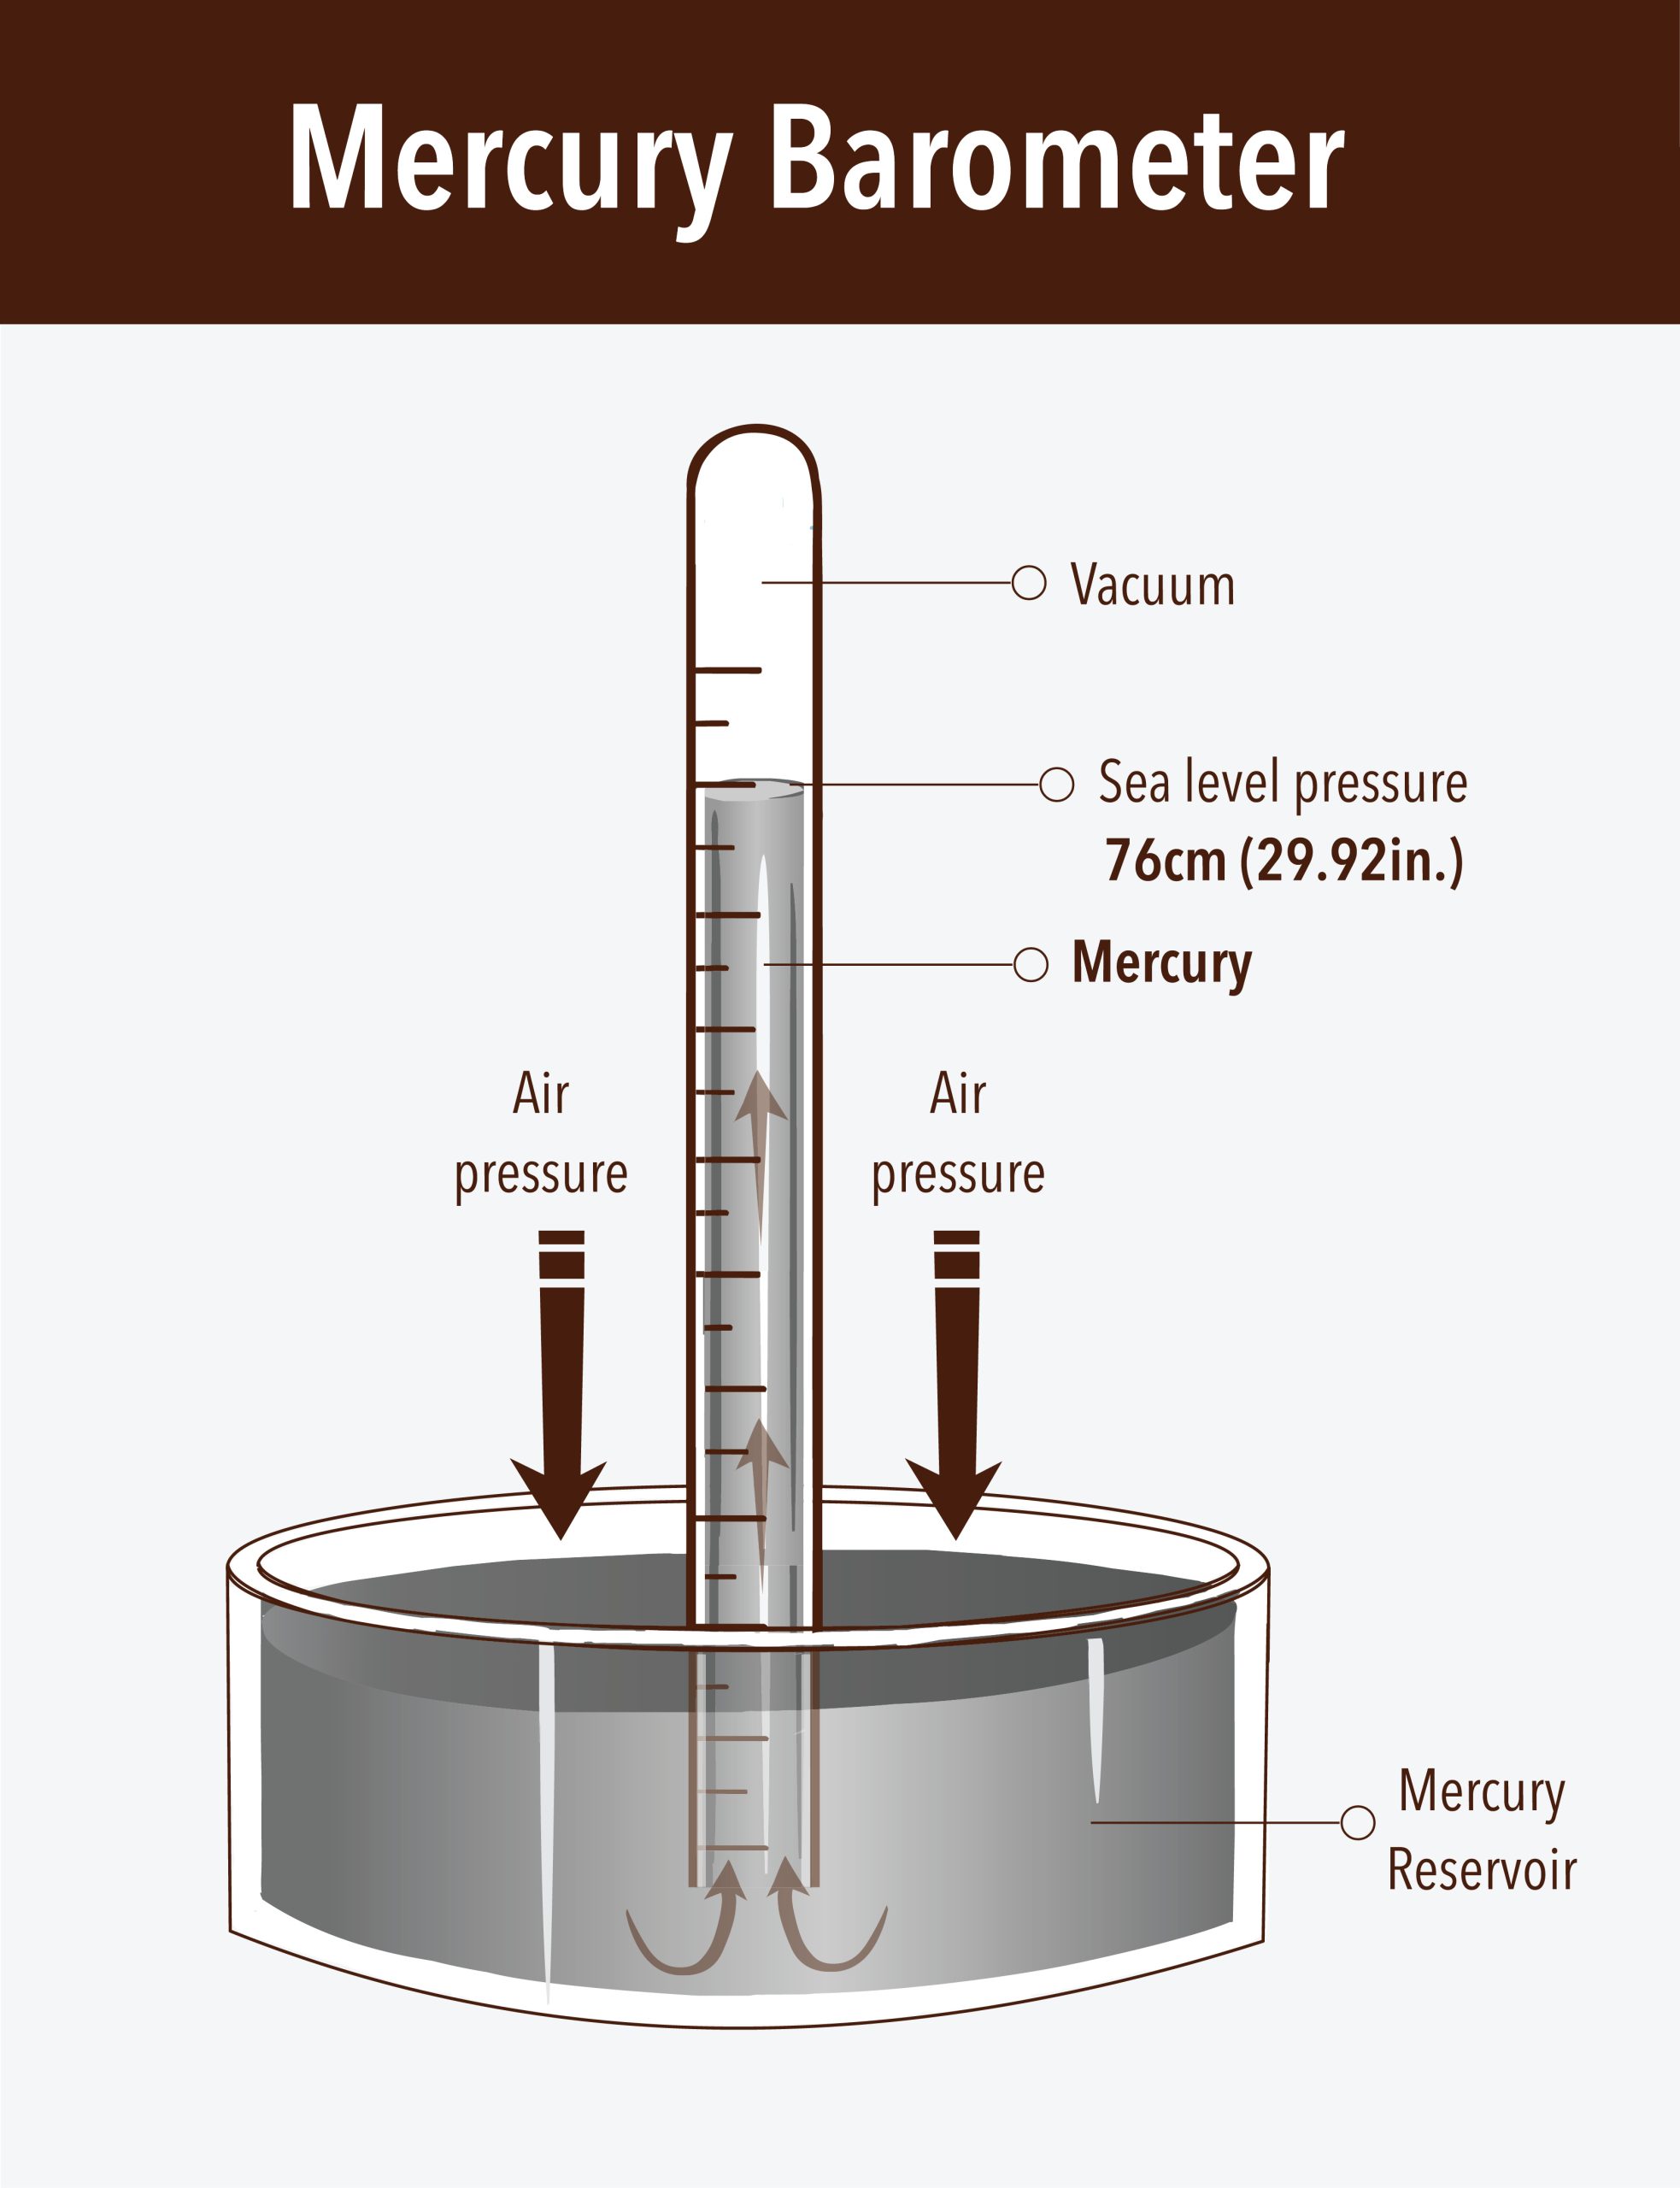 Illustration of a mercury barometer like Toricelli's one